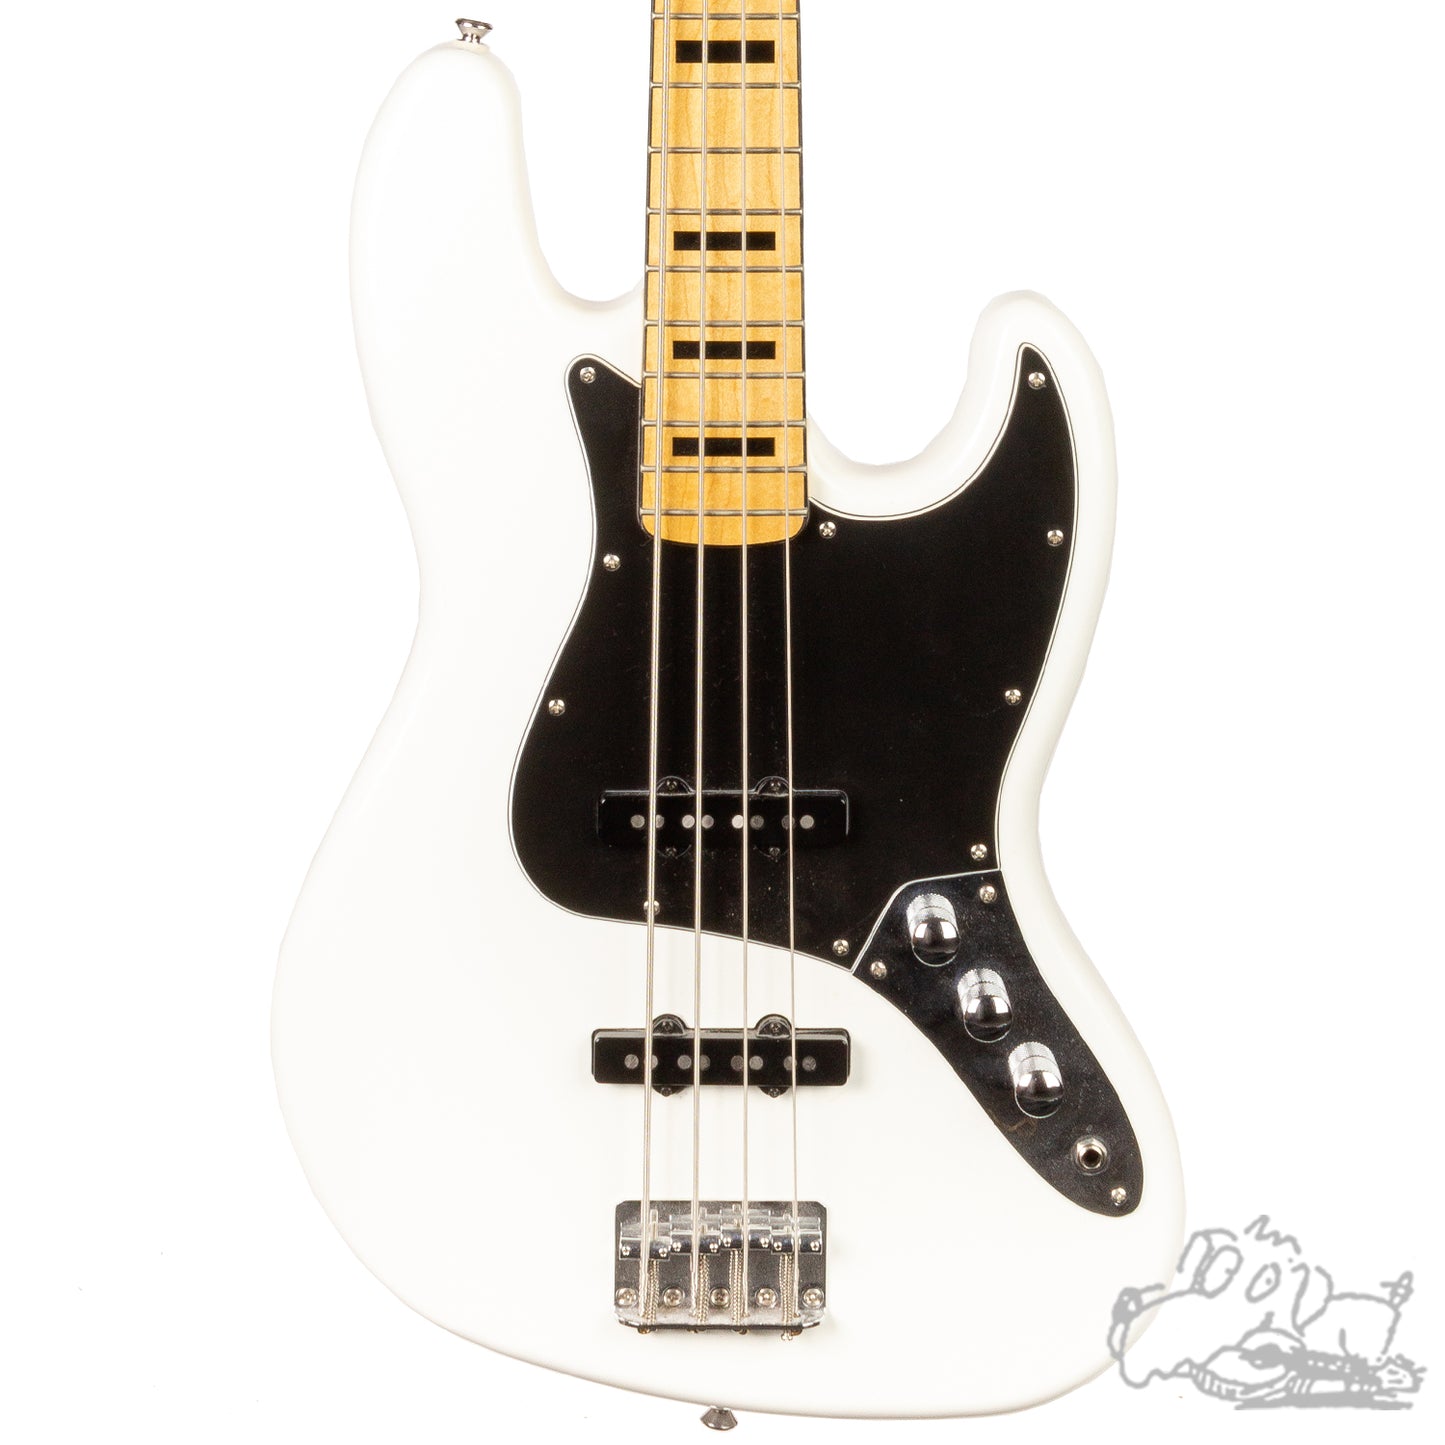 2013 Squier Jazz Bass - Used